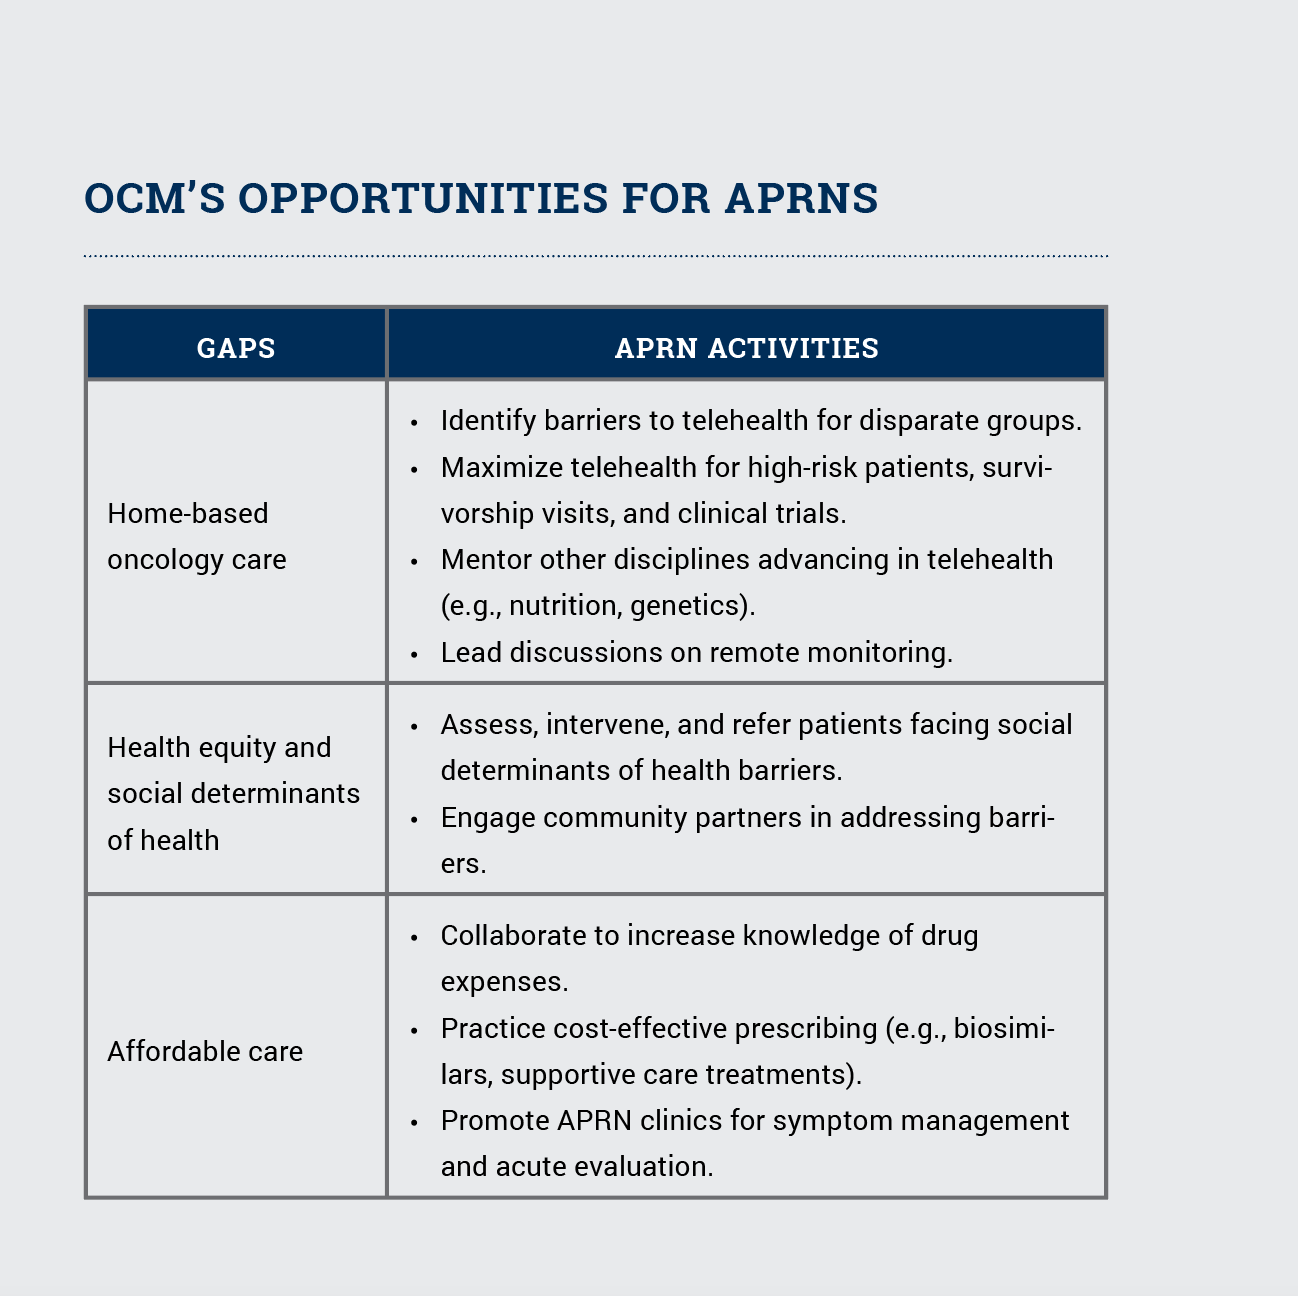 Oncology Care Model Created New Opportunities for APRNs to Transform Cancer Care